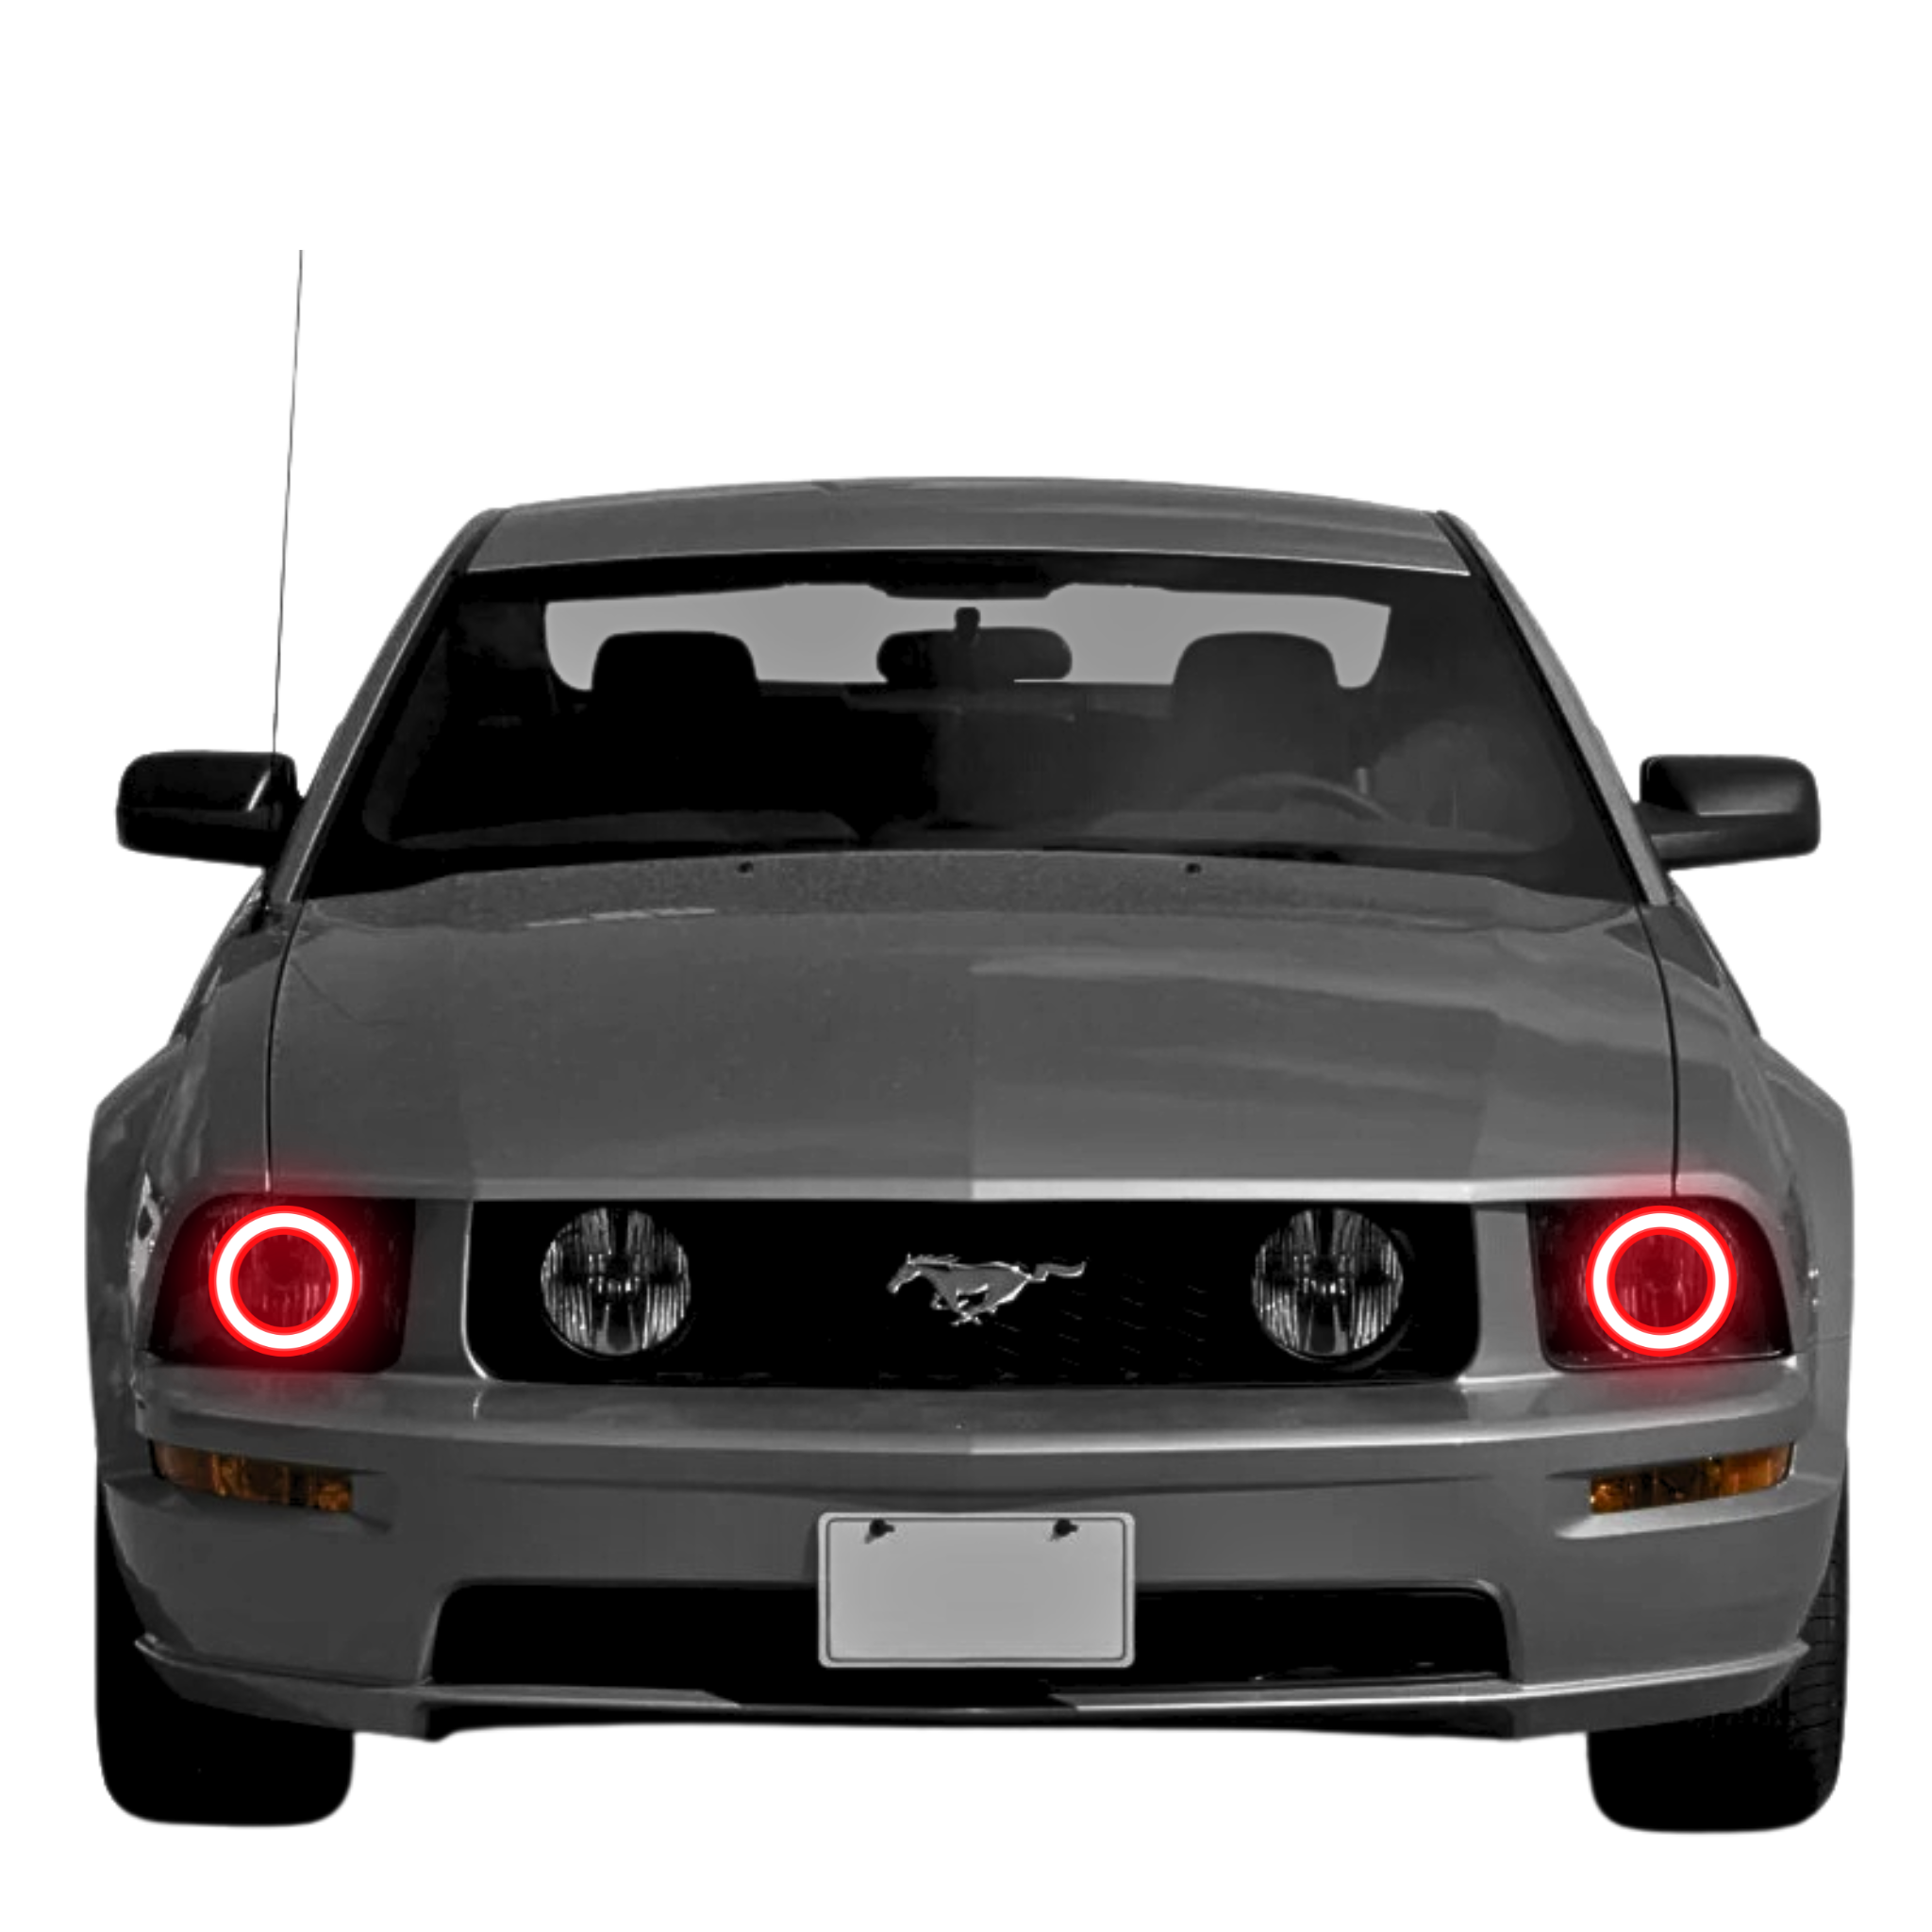 2005-2009 Ford Mustang Multicolor Halo Kit - RGB Halo Kits Multicolor Flow Series Color Chasing RGBWA LED headlight kit Oracle Lighting Trendz OneUpLighting Morimoto theretrofitsource AutoLEDTech Diode Dynamics